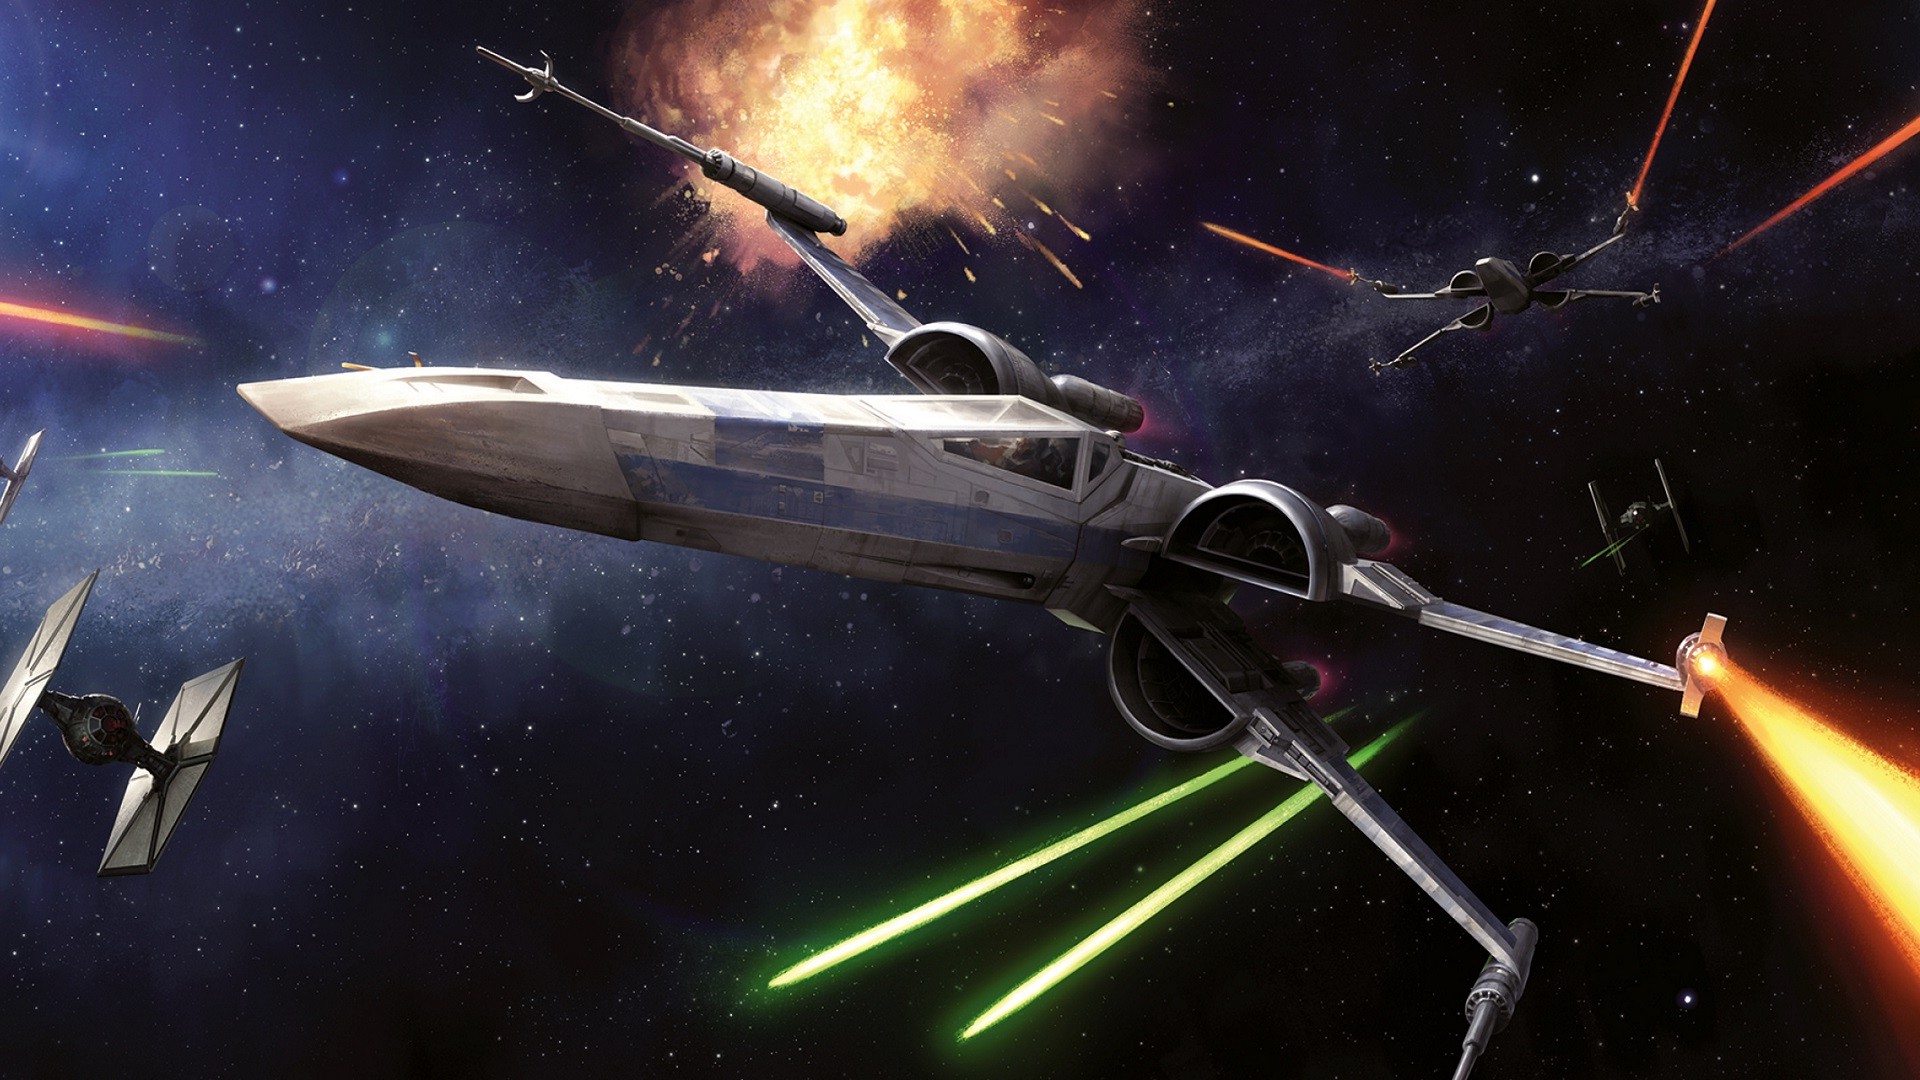 Star Wars, Space, Spaceship, X wing, Laser, Lasers, Science Fiction, Artwork Wallpaper